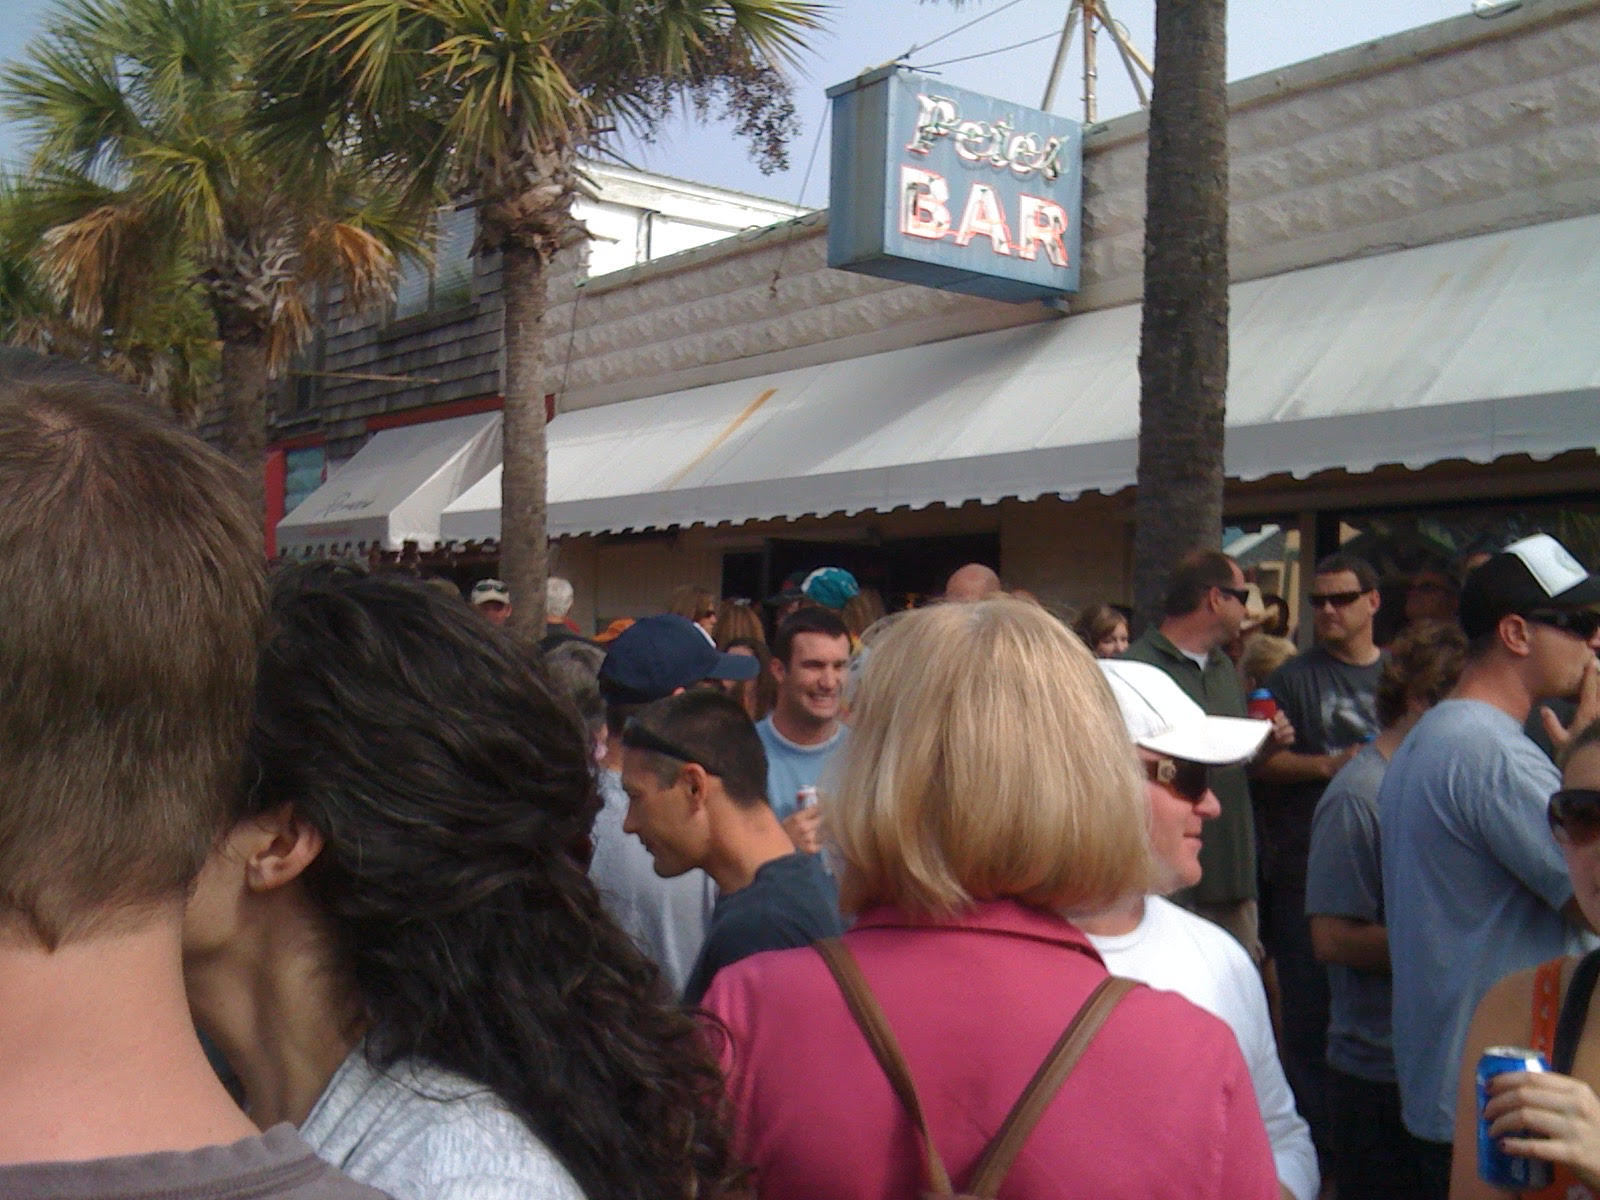 Crowds pack the street in front of Pete's Bar for the annual Thanksgiving morning party.